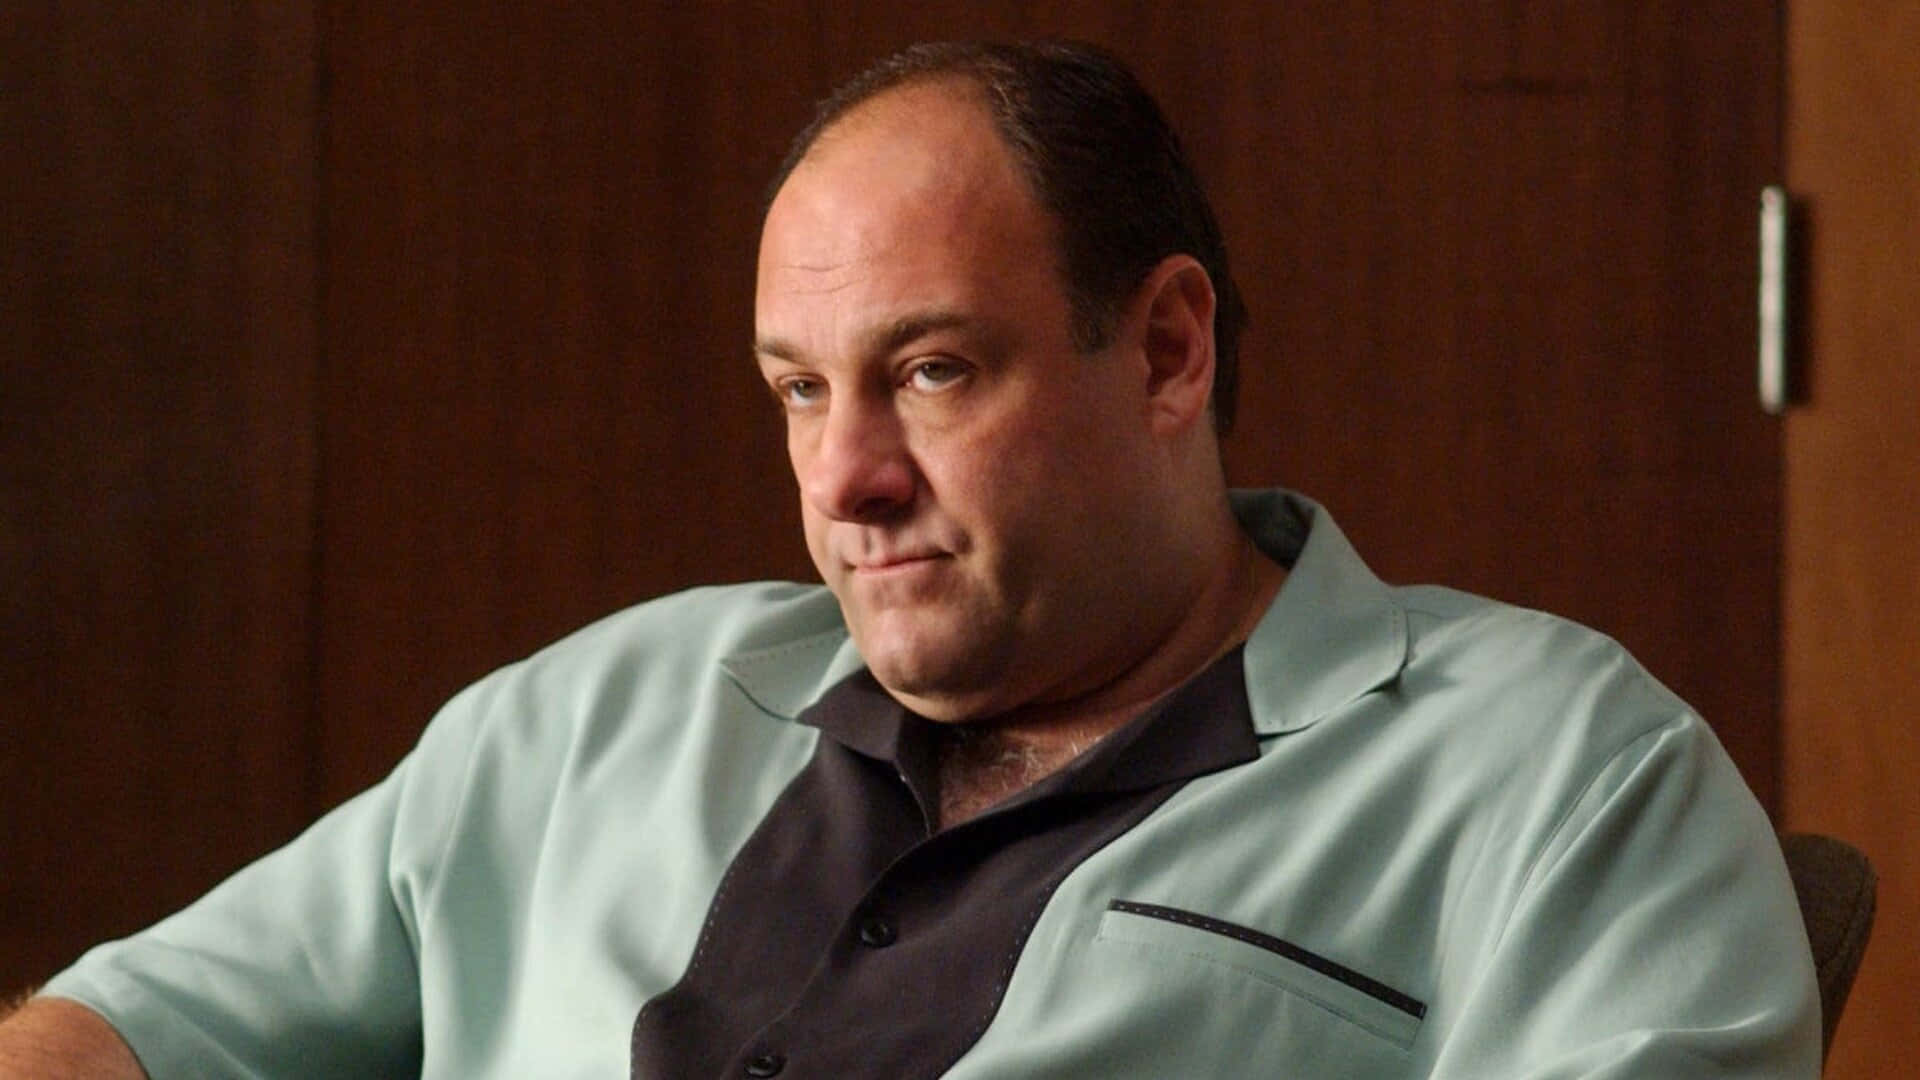 Jamesgandolfini Was An Acclaimed American Actor Best Known For His Role As Tony Soprano In The Television Series 